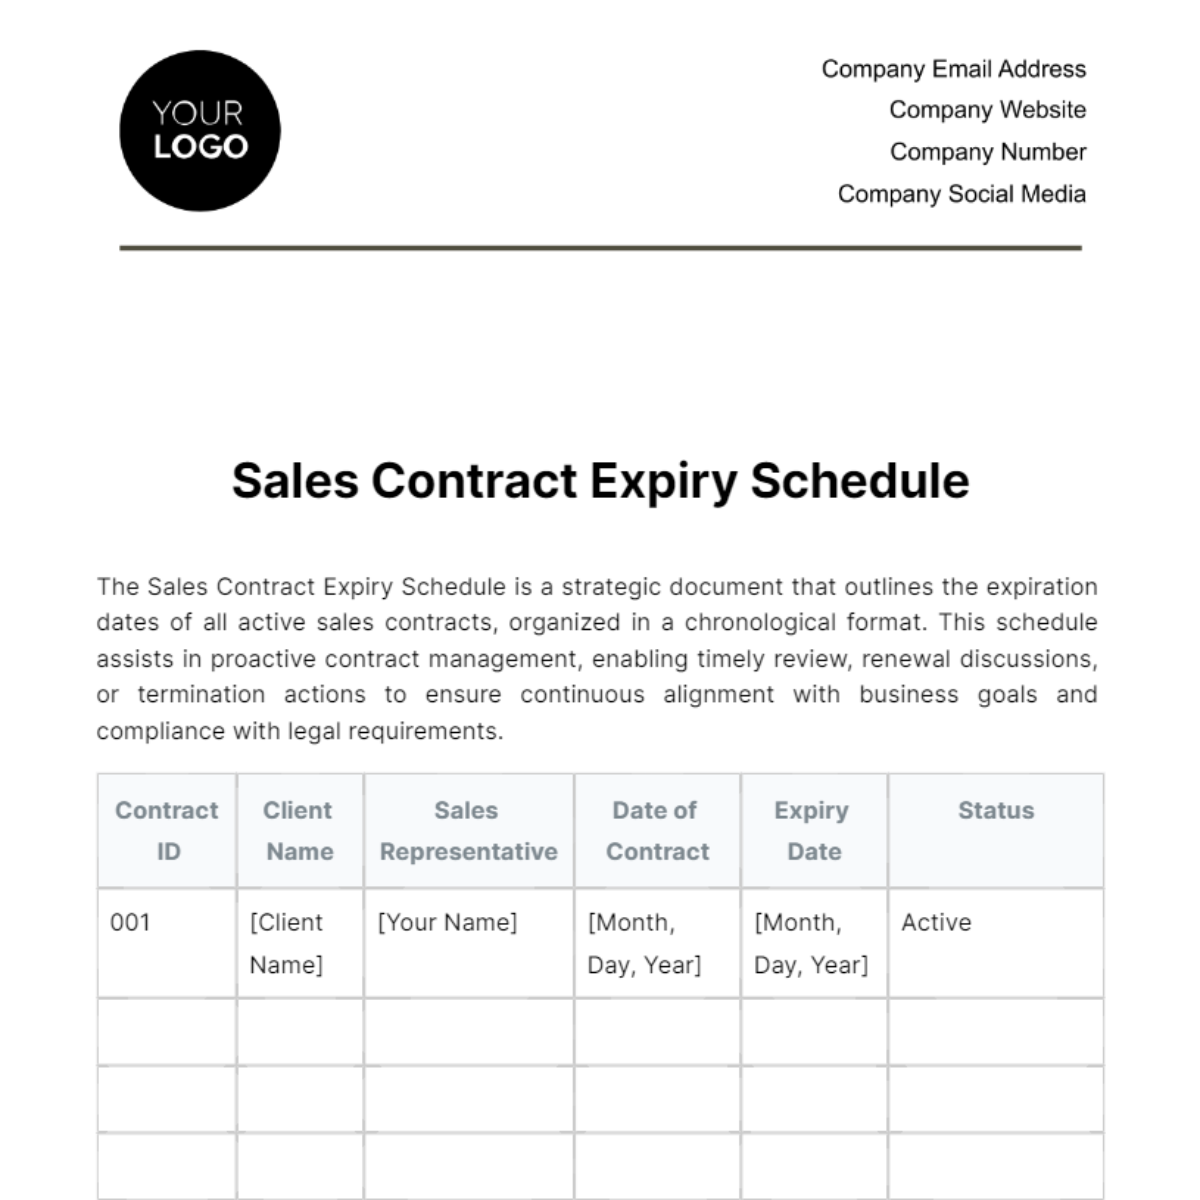 Free Sales Contract Expiry Schedule Template